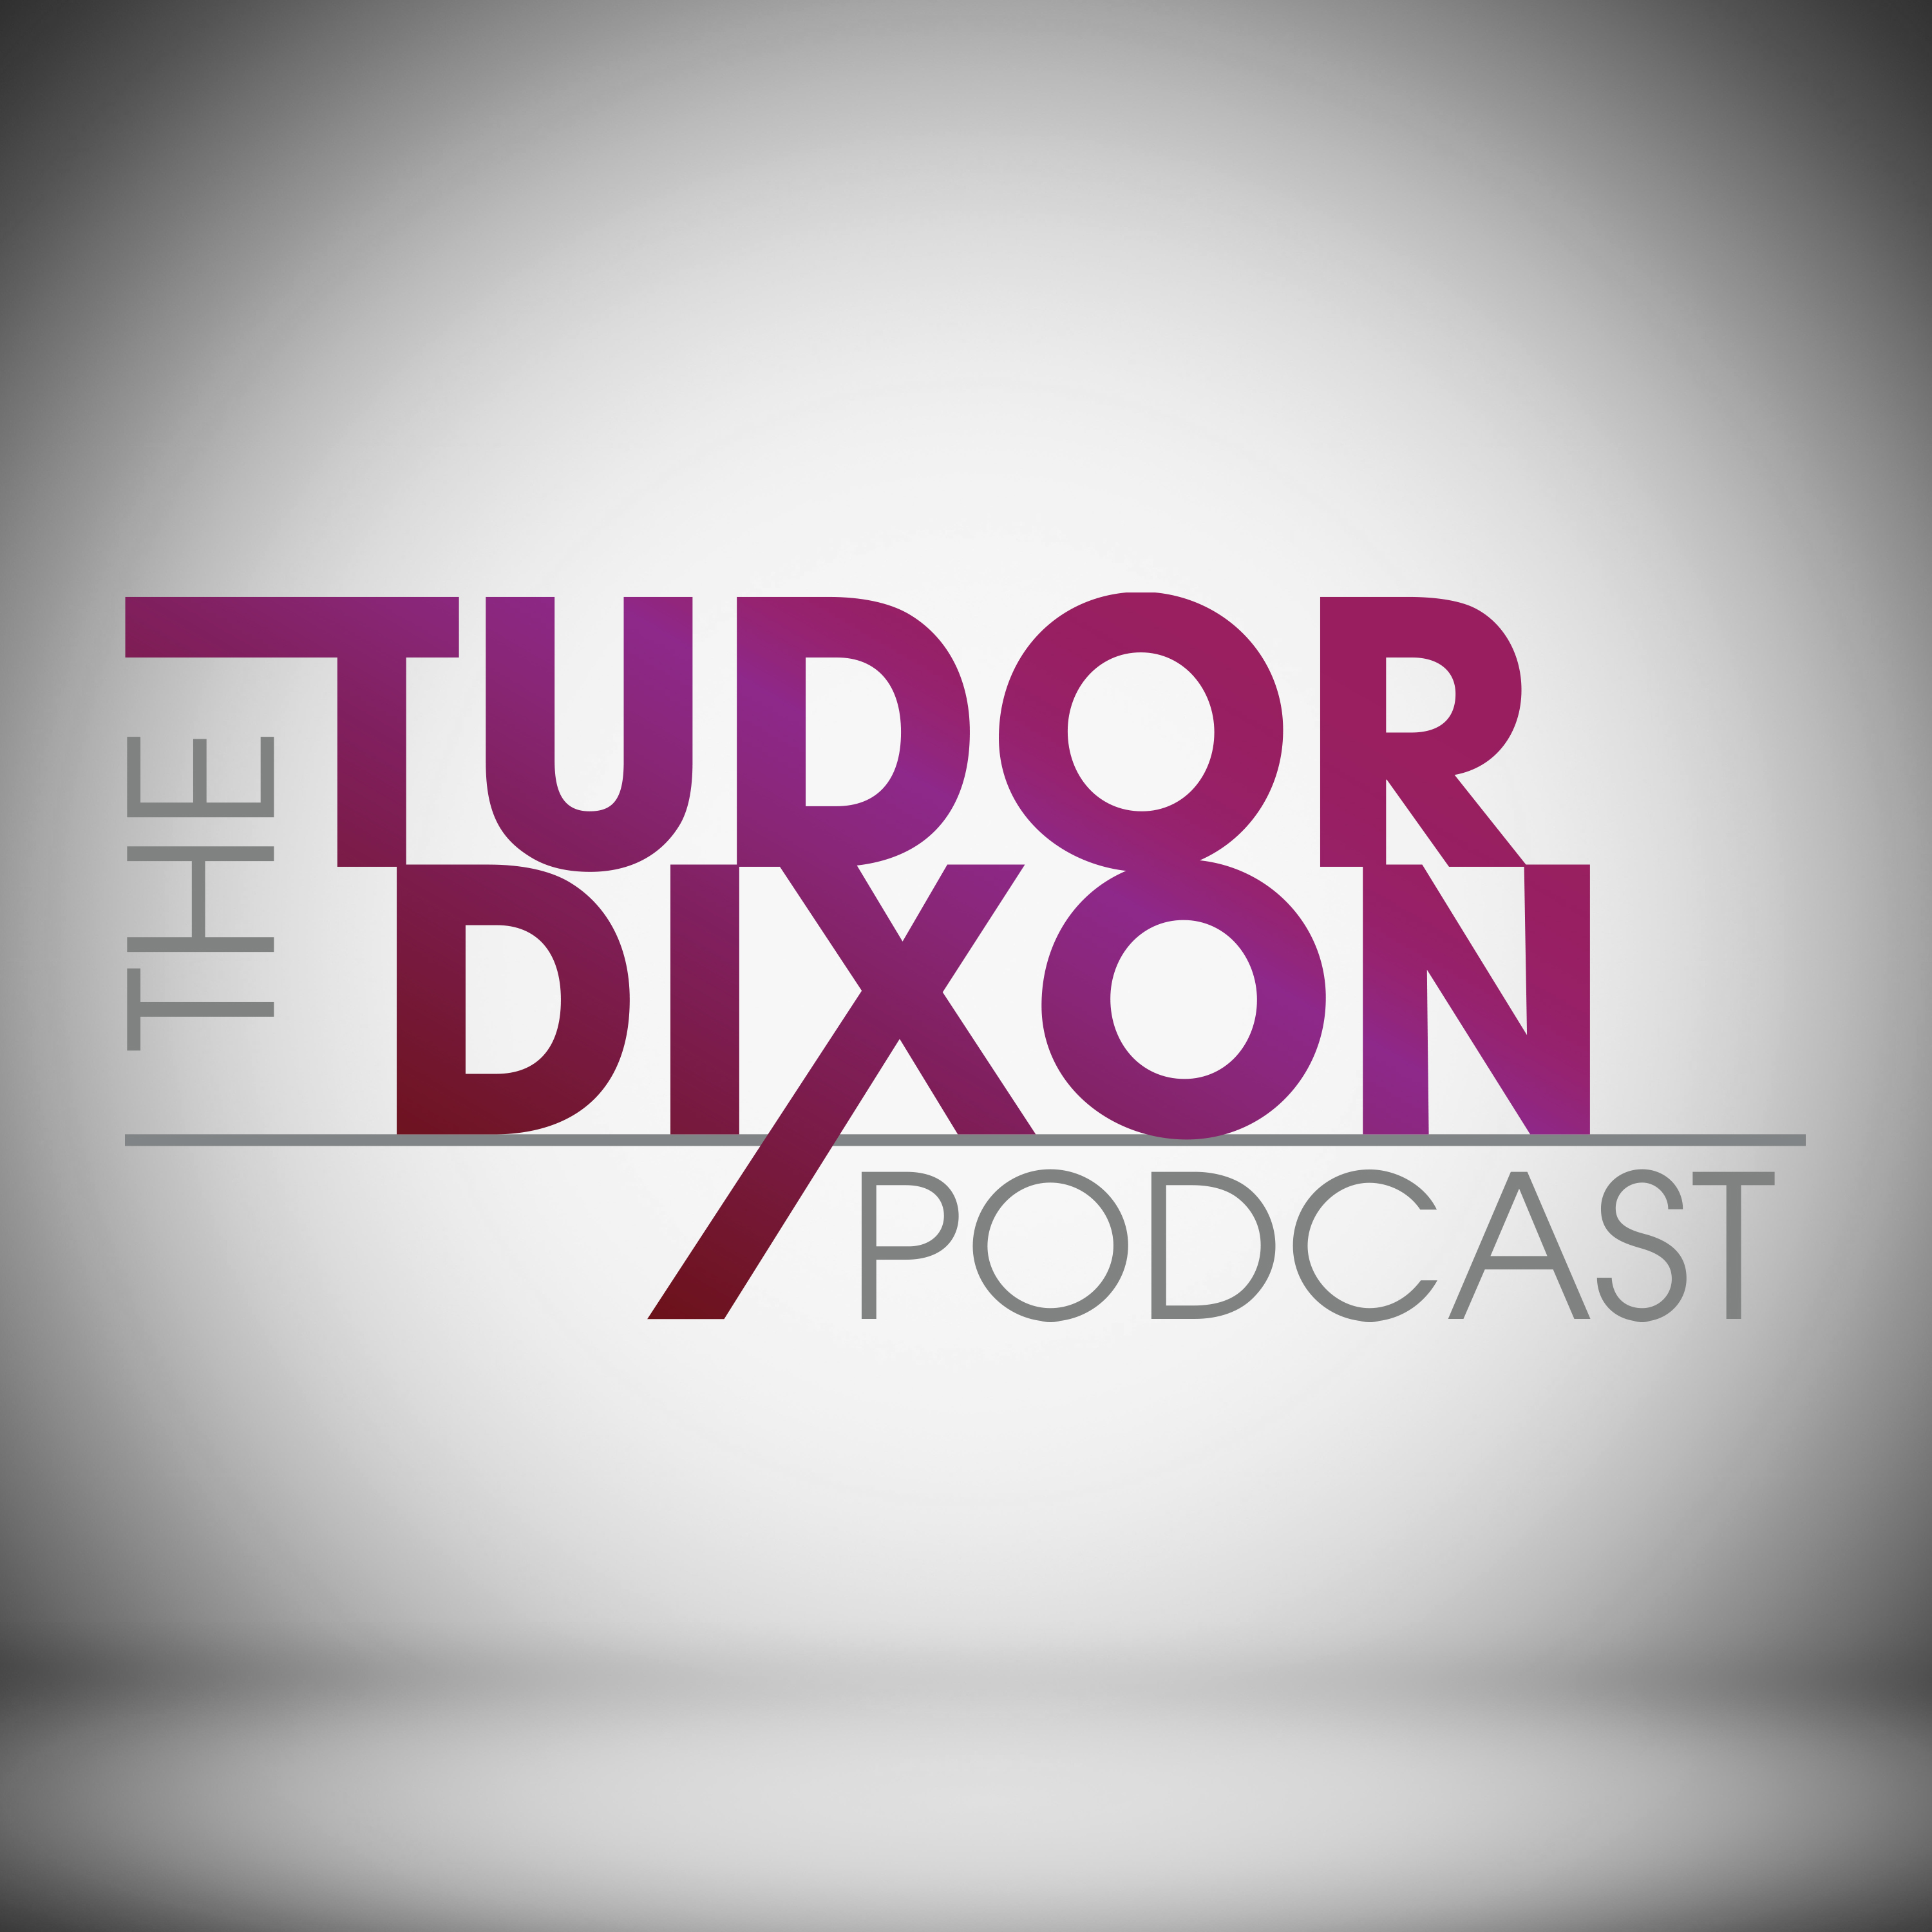 The Tudor Dixon Podcast: Unmasking Anti-Semitism and Terrorism Sympathizers at Colleges in America